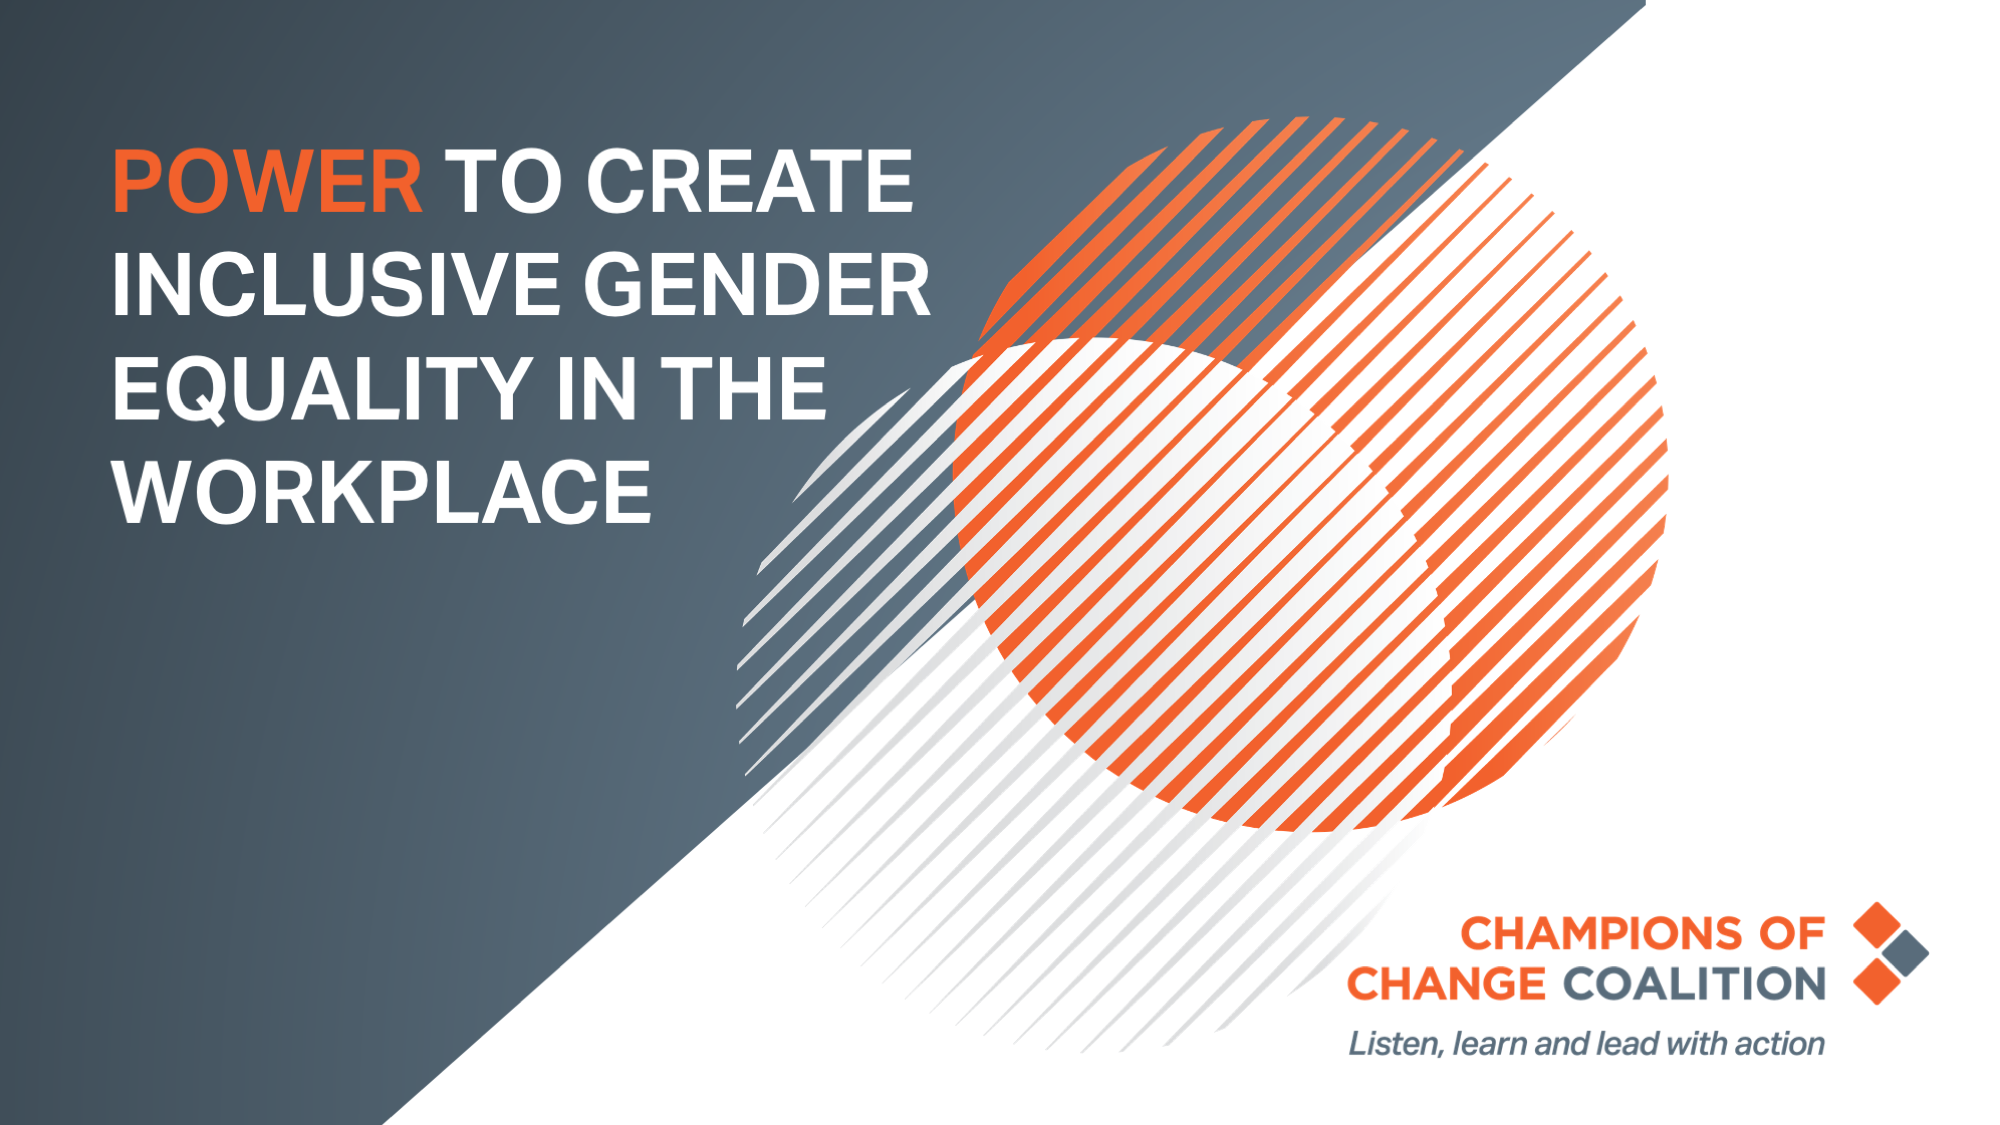 Power to create inclusive gender equality in the workplace